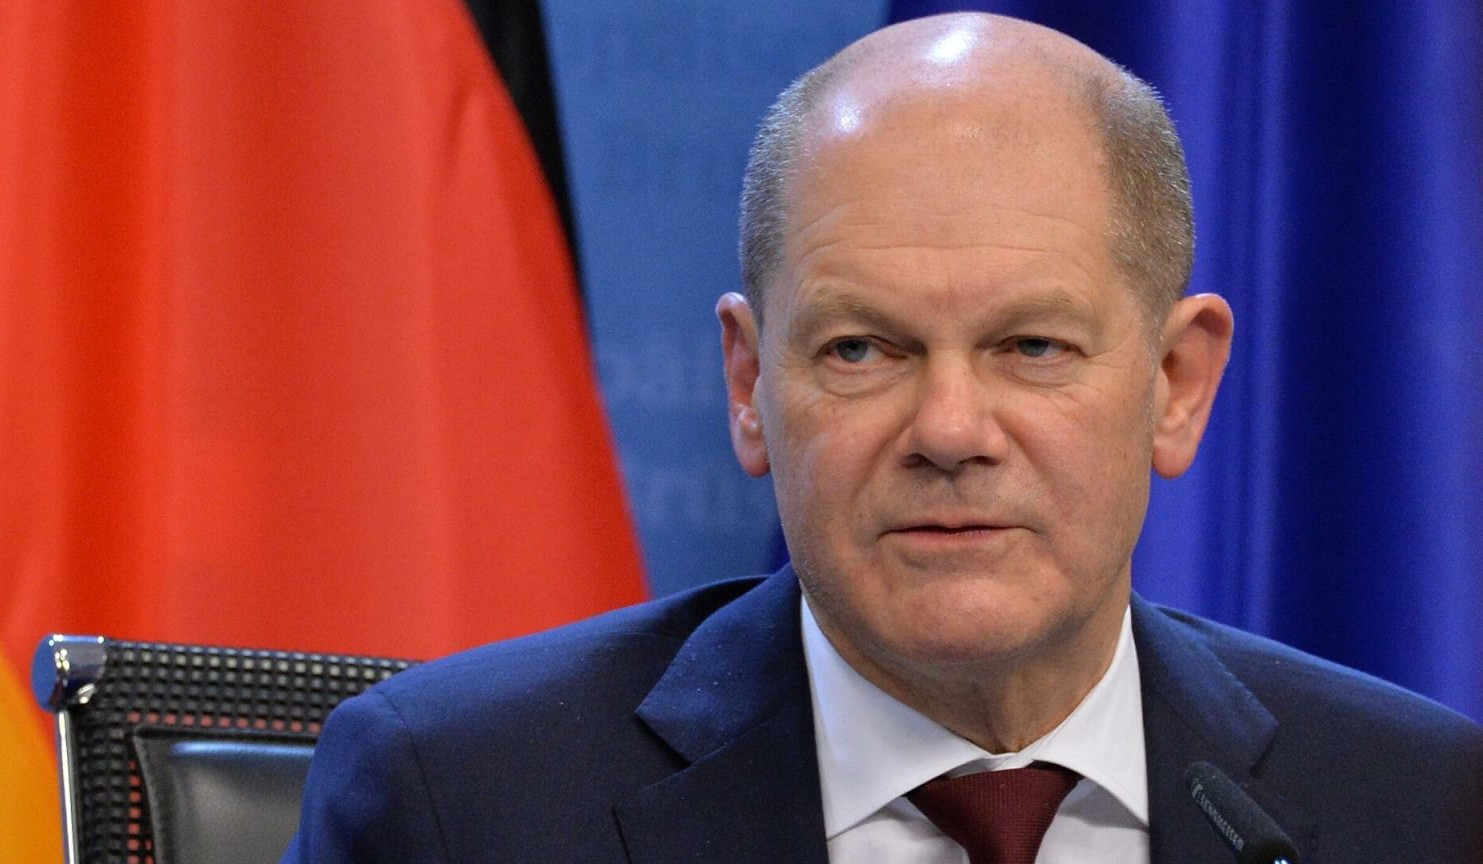 Consequences of Ukrainian conflict will be impossible to overcome in near future: Scholz